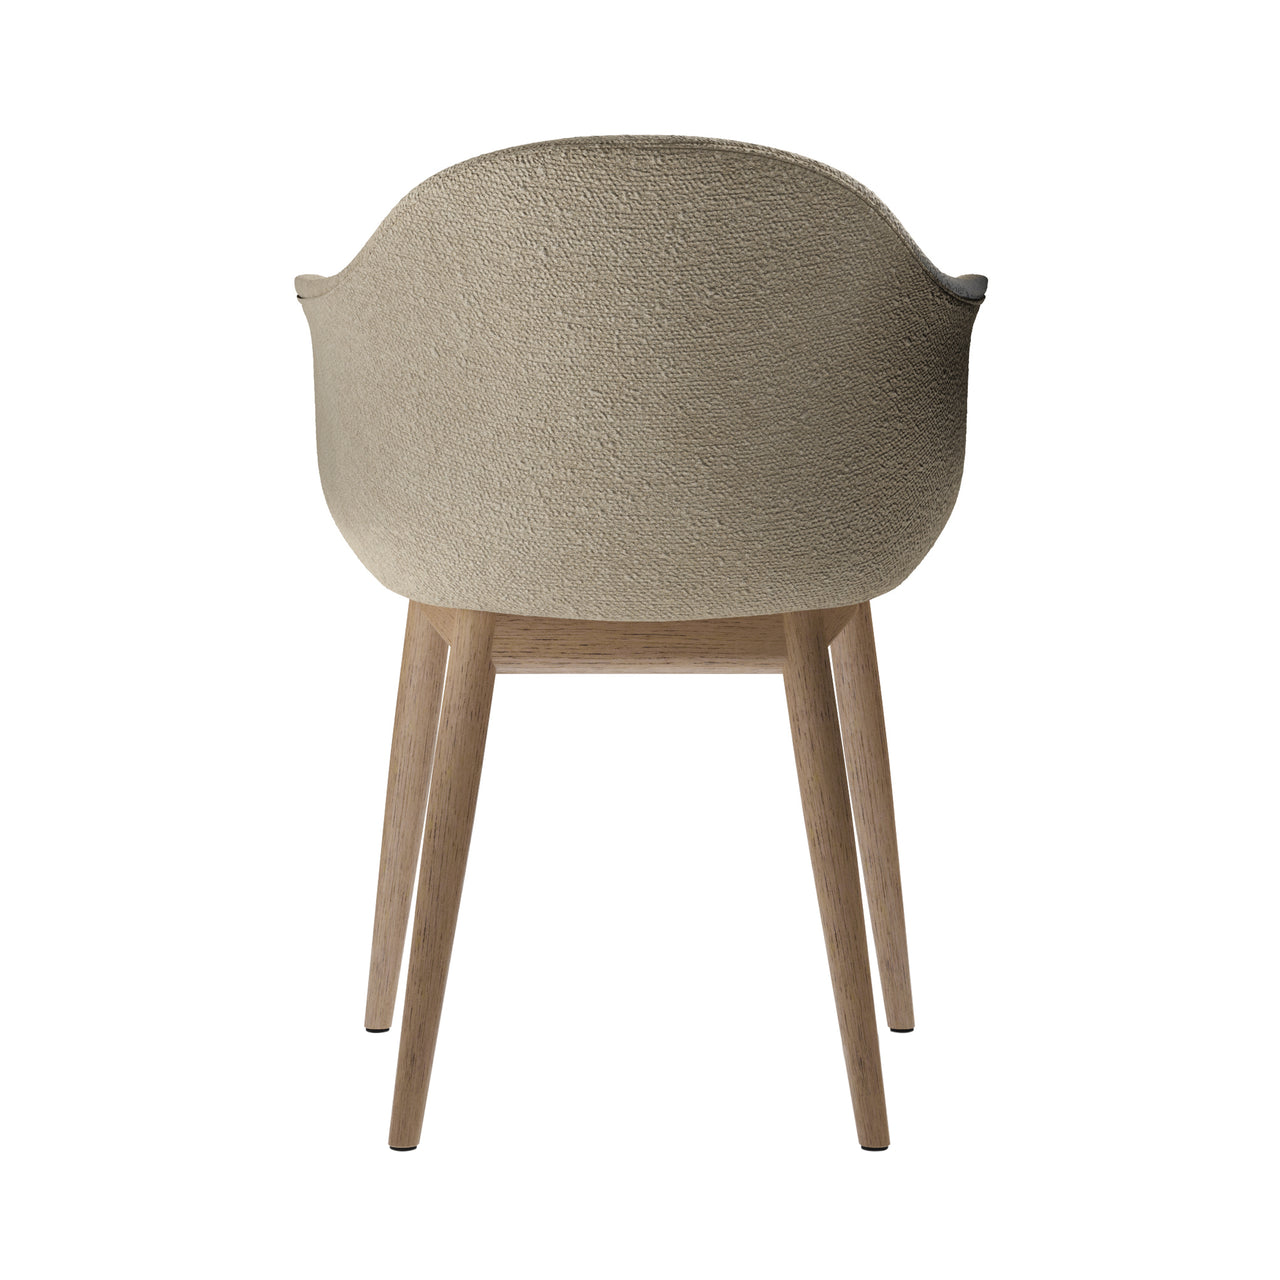 Harbour Dining Chair: Wood Base Upholstered + Natural Oak